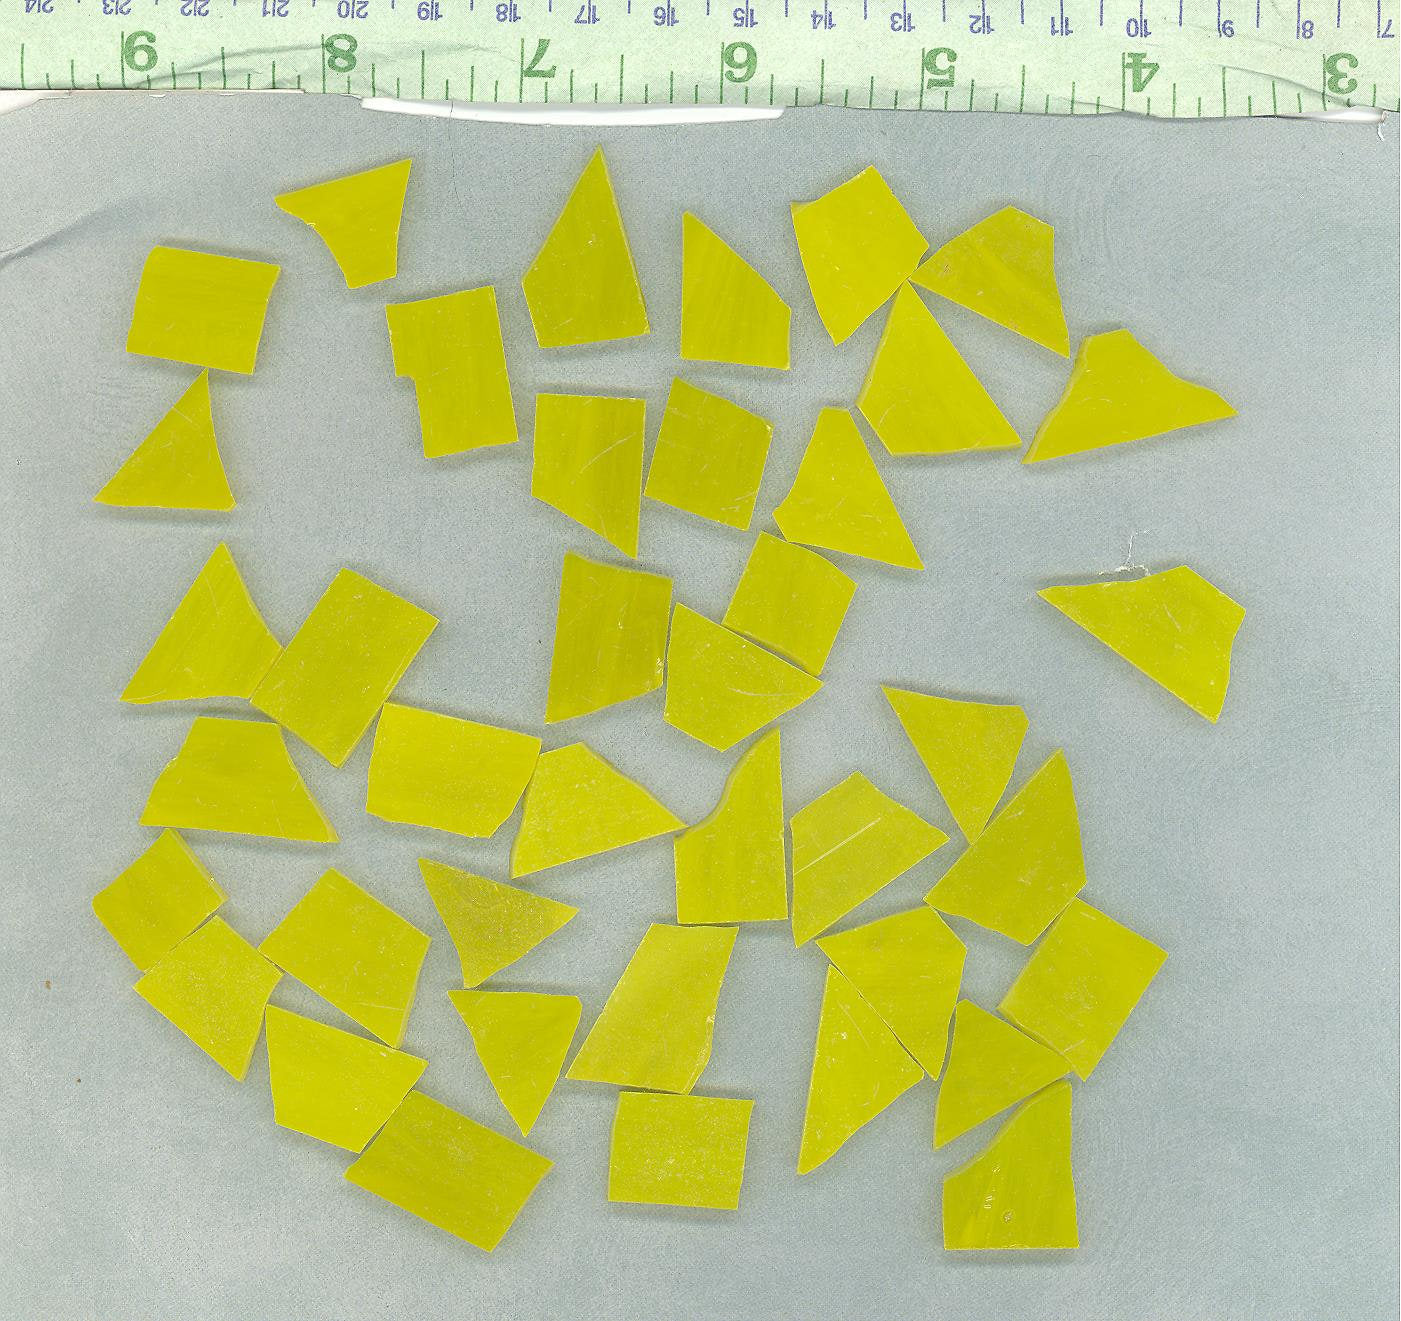 Stained Glass Mosaic Tiles in Sunshine Yellow - 1/2 Pound - 5-15 mm Various Shapes